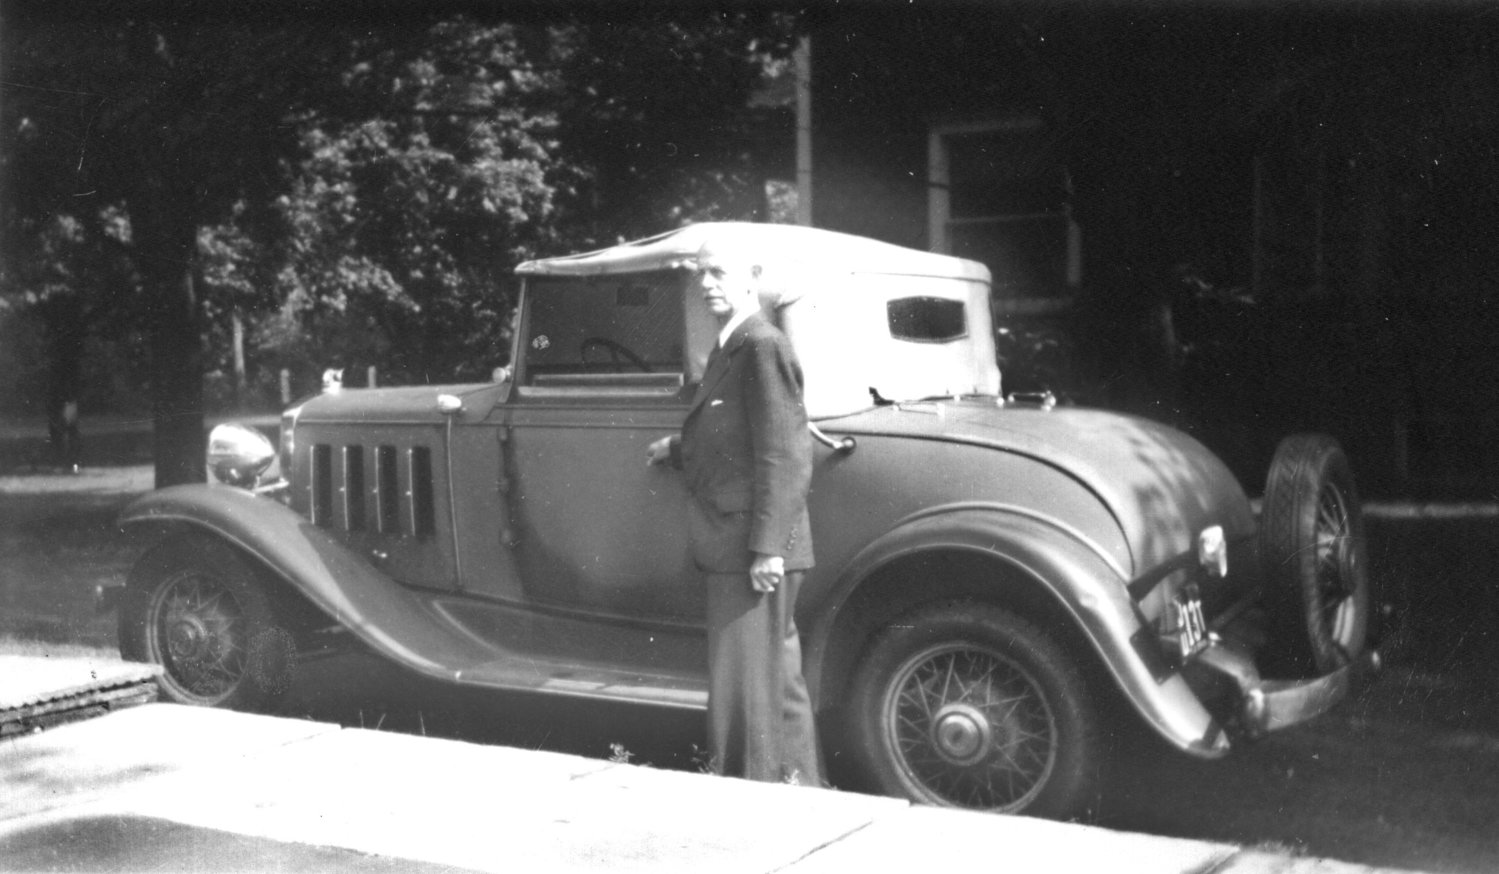 My great-grandfather, Frederick F. Schuetz, and his 1932 Chevrolet Sport Roadster, which he kept for decades. I’m sure it got counted at least once.